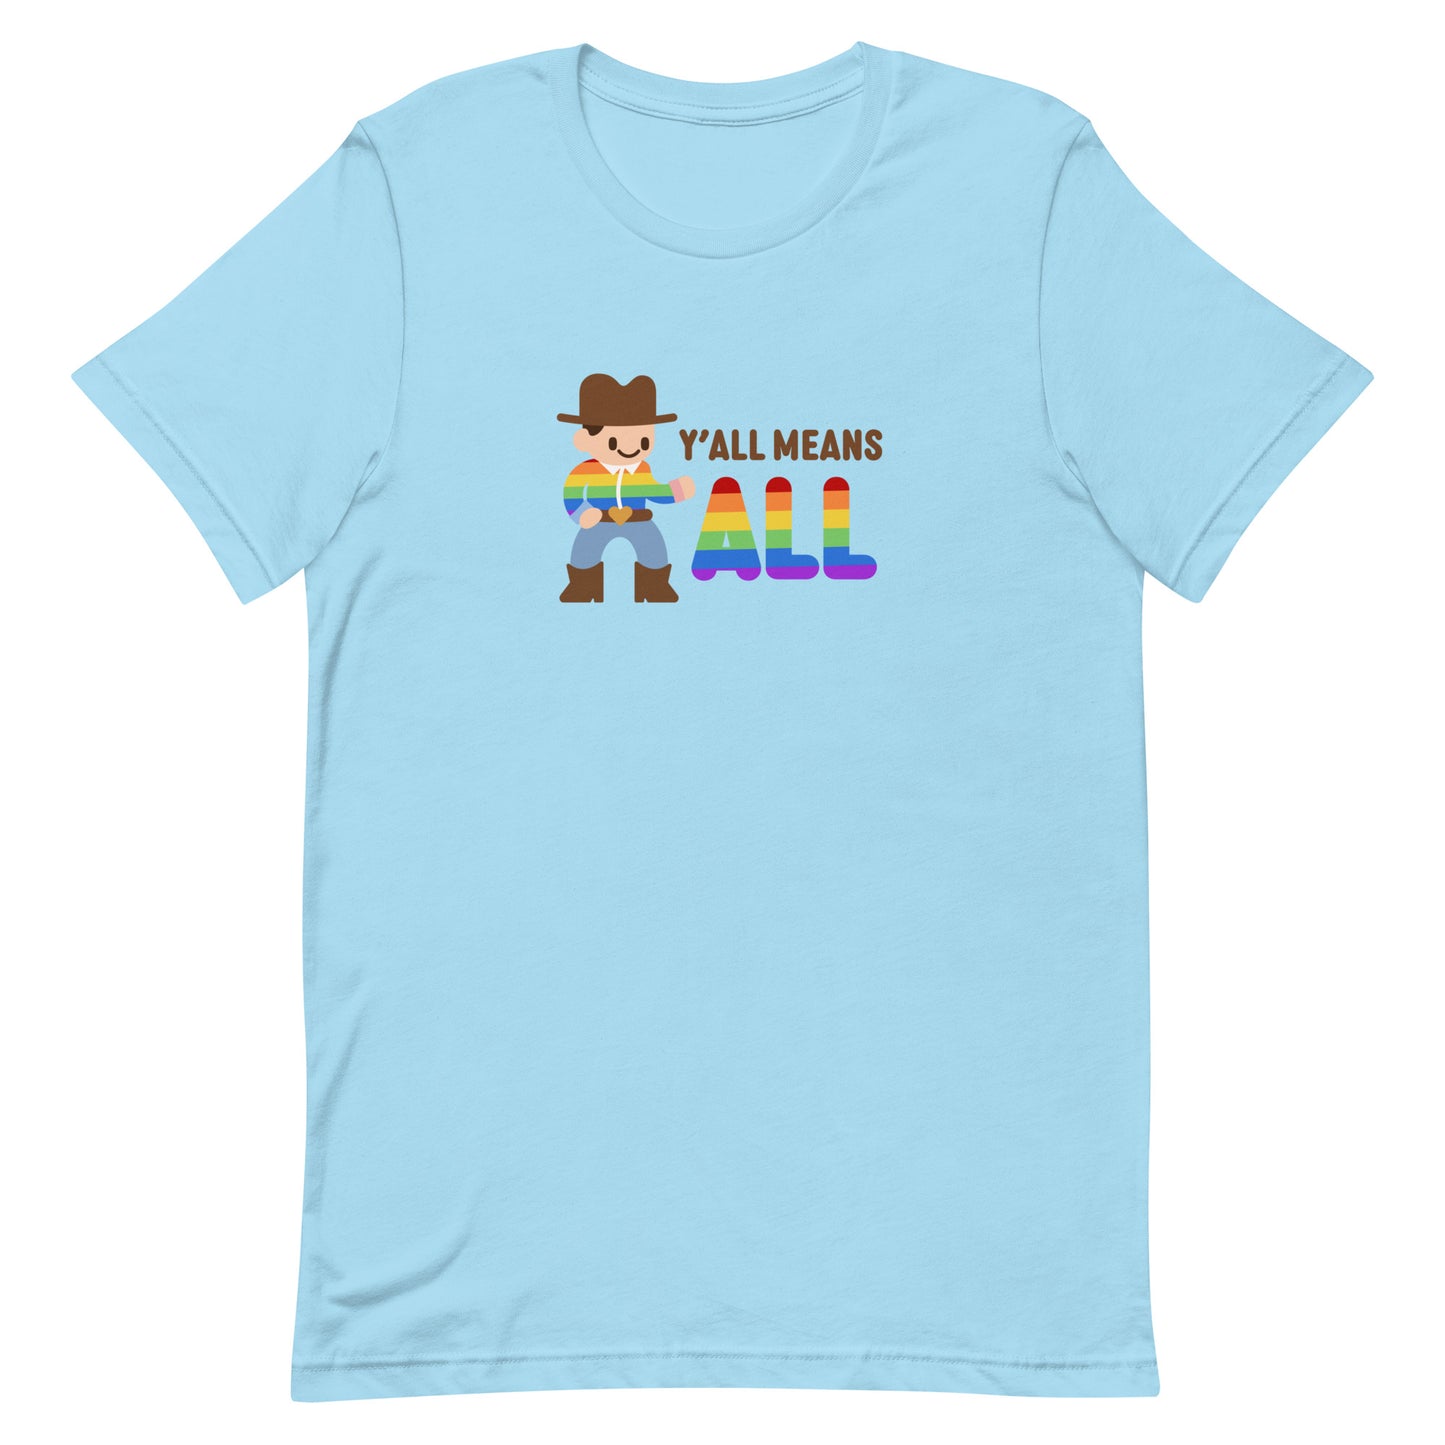 A light blue crewneck t-shirt featuring an illustration of a smiling cowboy wearing a rainbow striped shirt. Text alongside the cowboy reads "Y'all means ALL". The word "ALL" is rainbow-colored to match the cowboy's shirt.